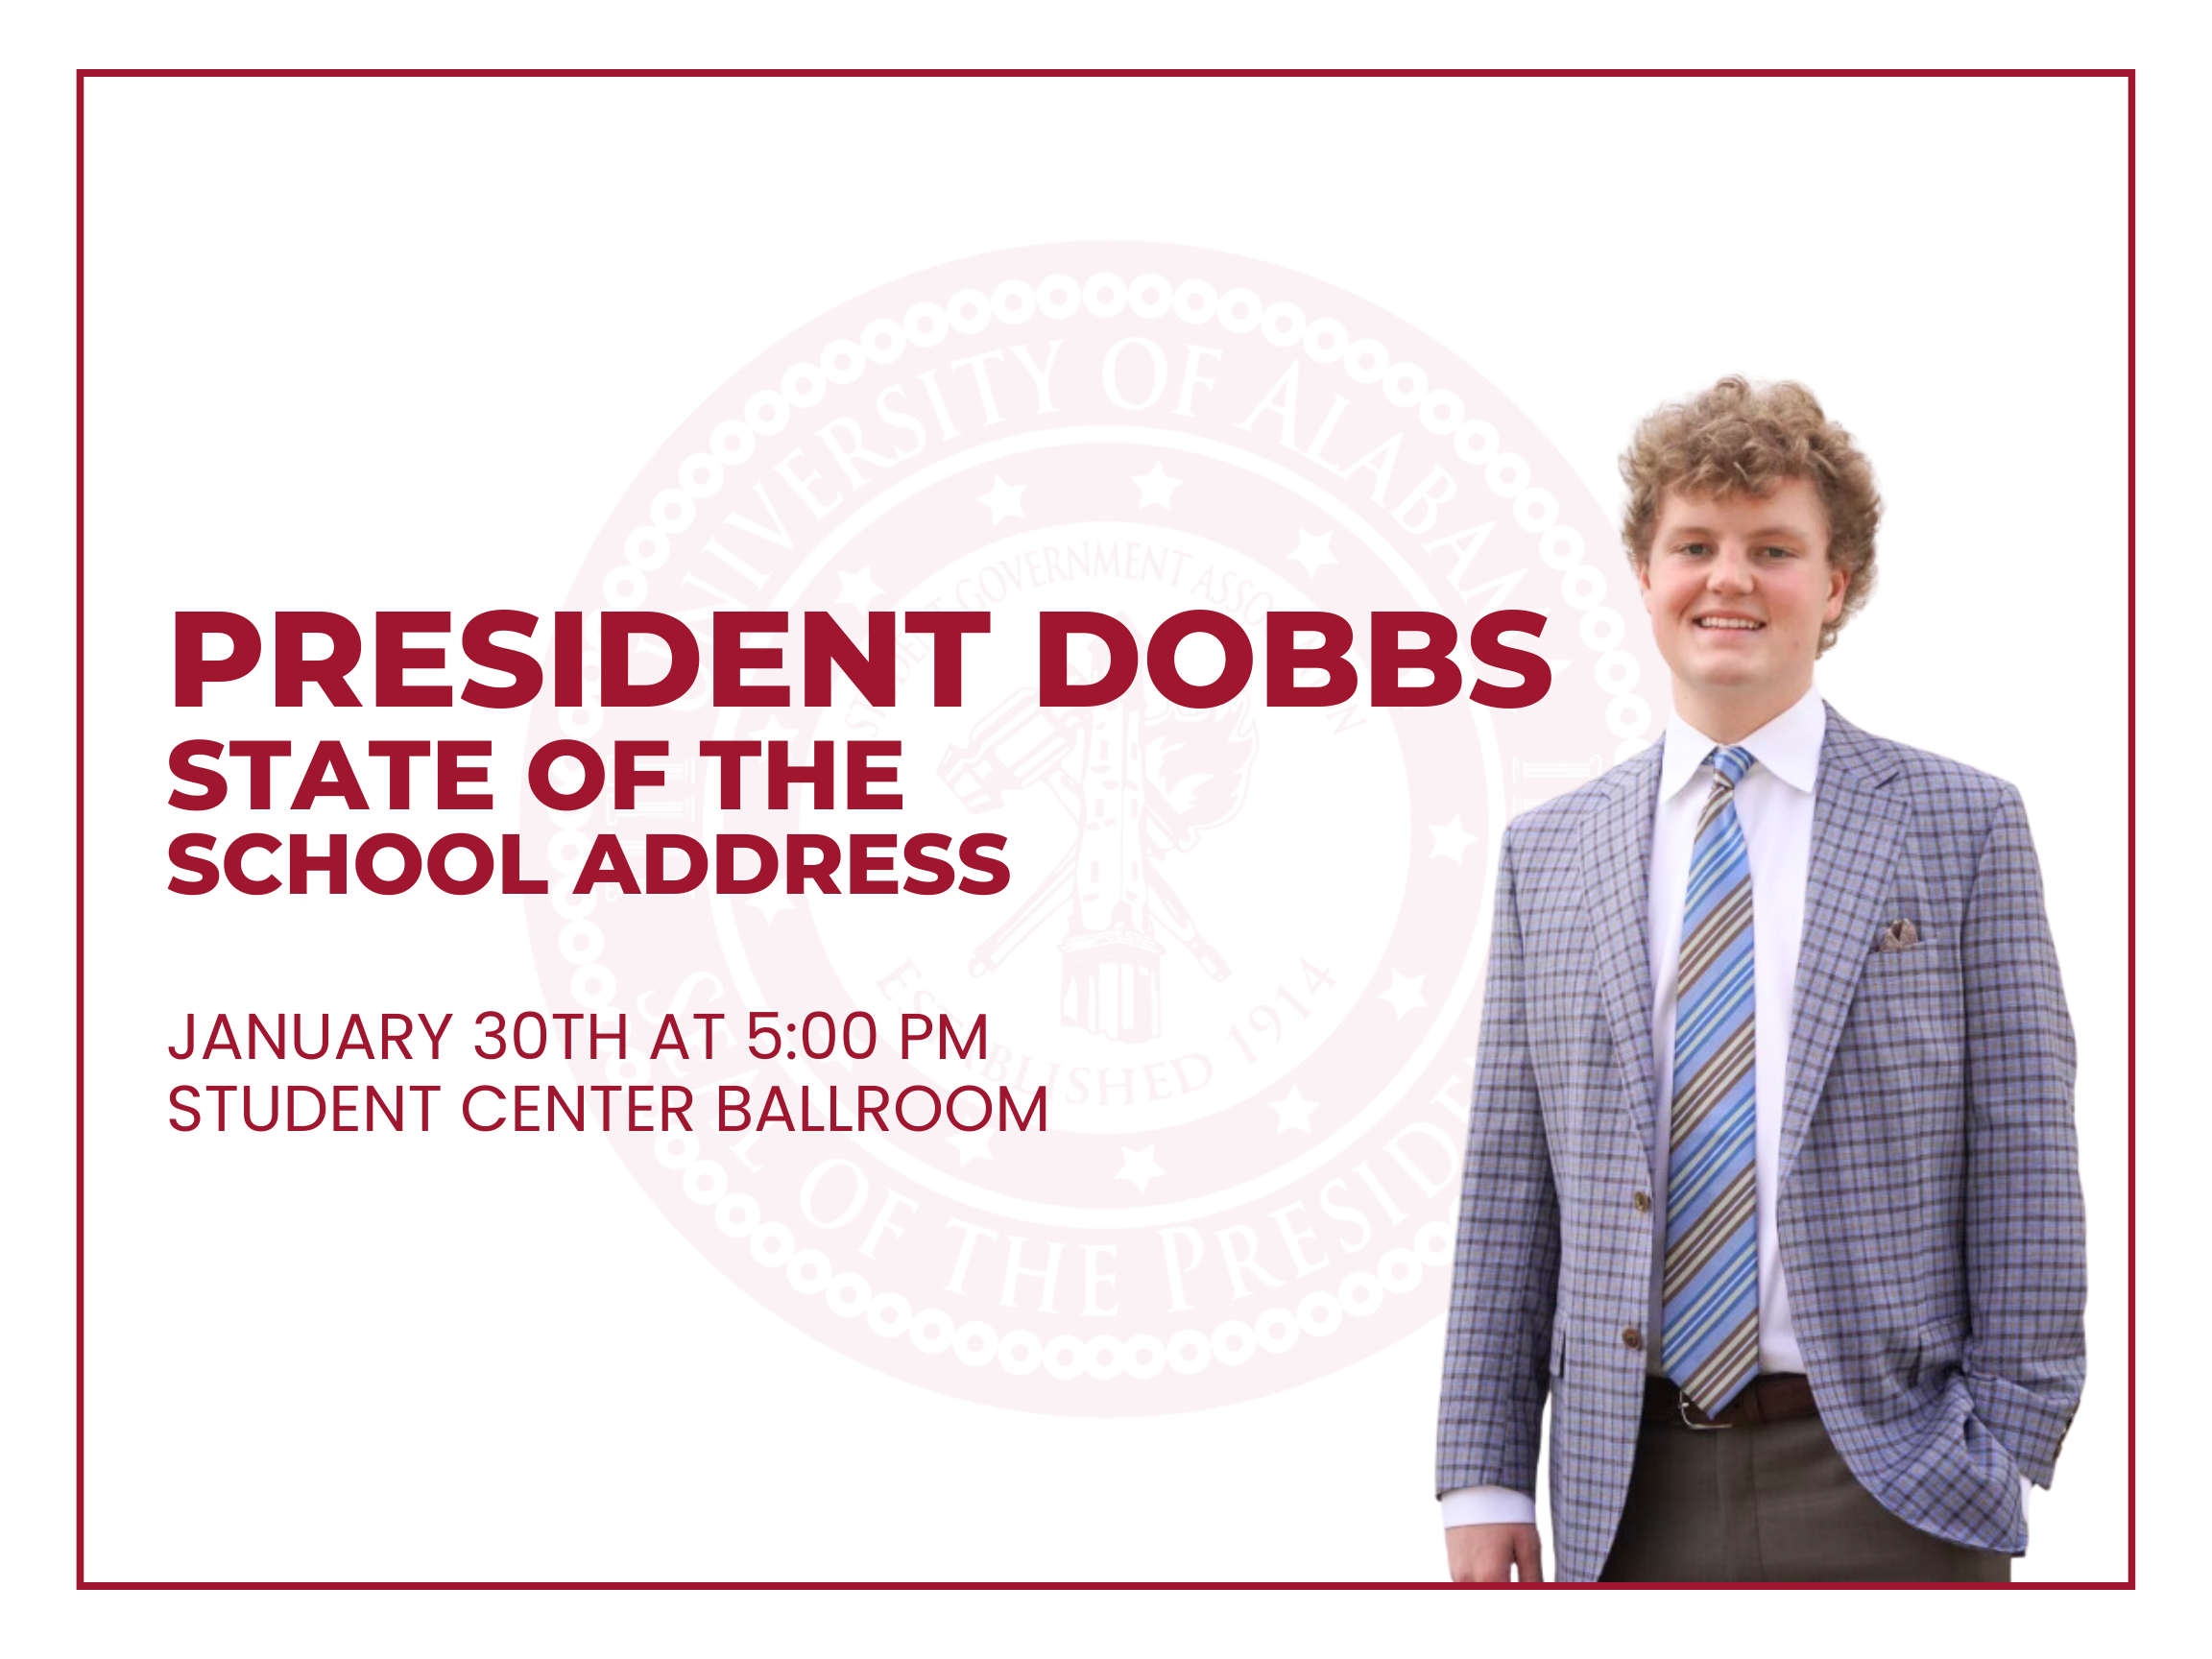 The State of the school address will occur on 1/30 at 5pm in the student center Ballroom